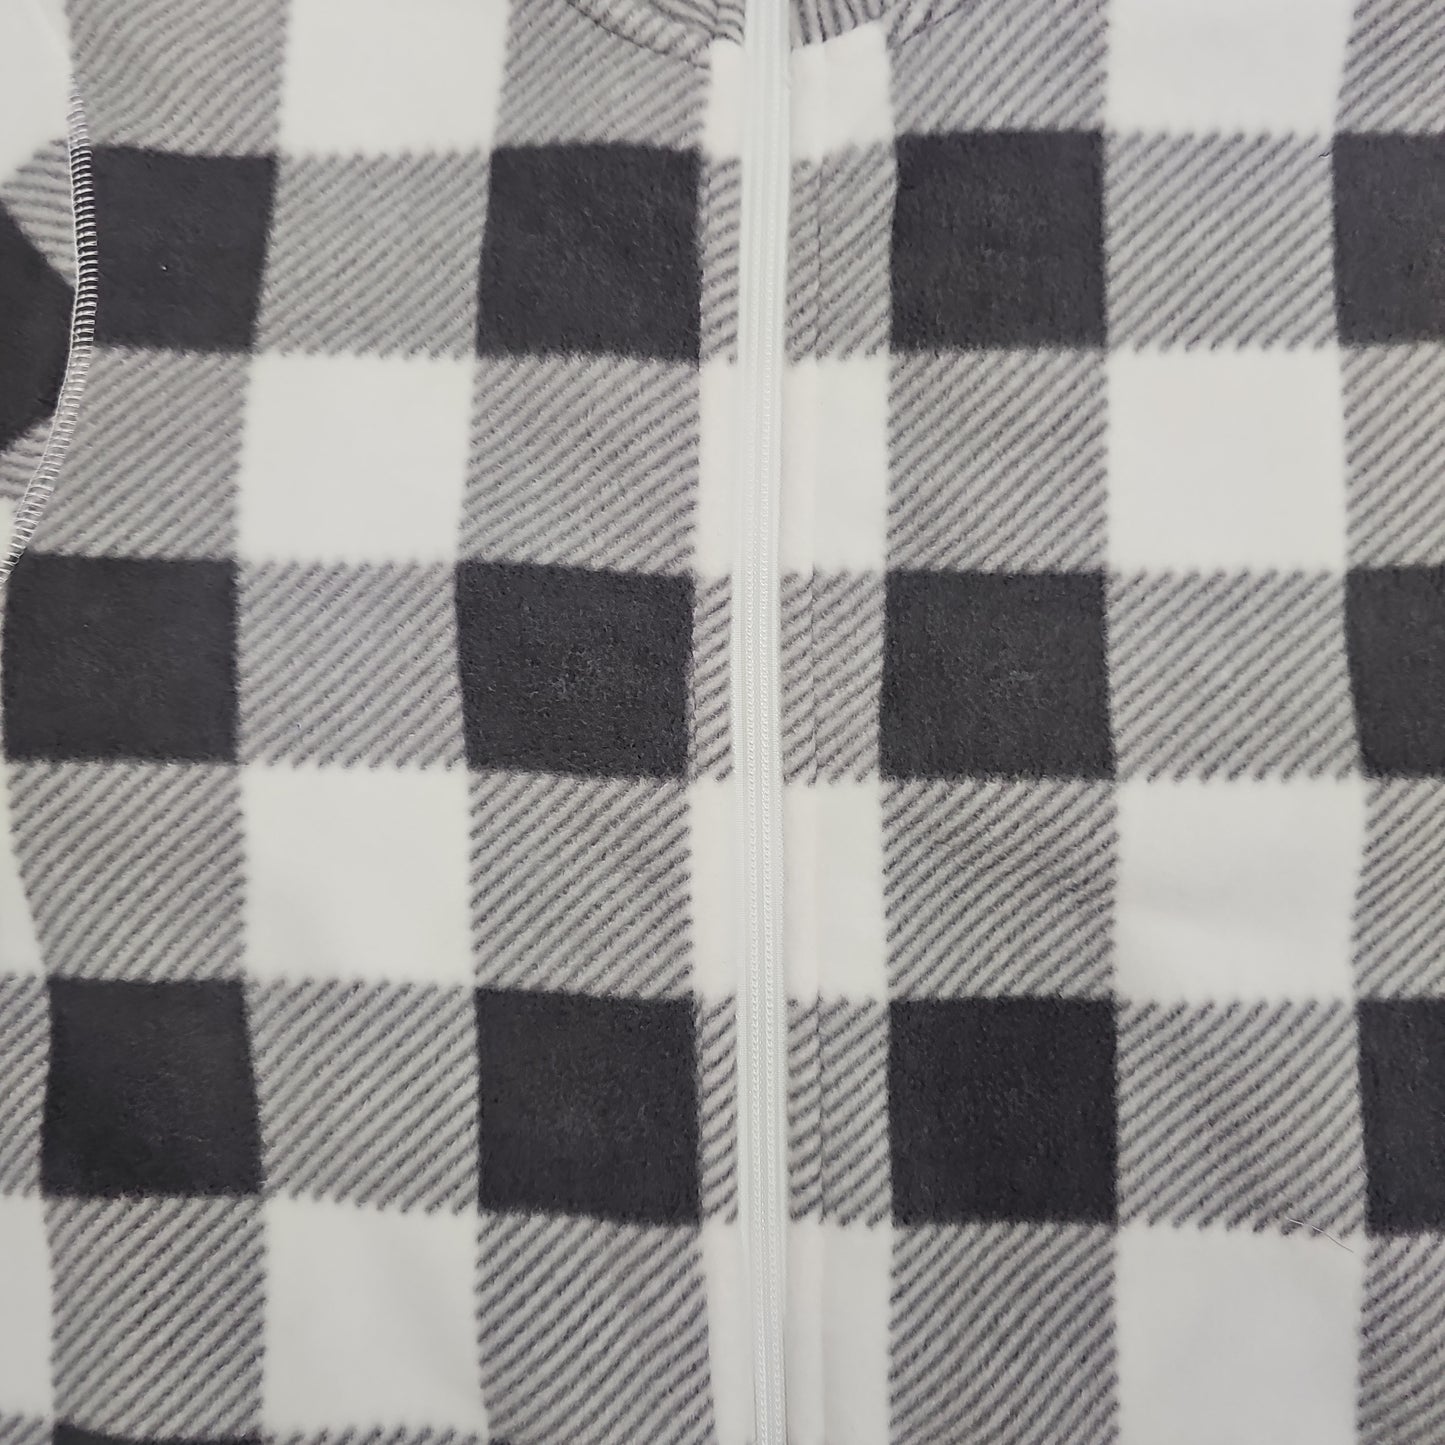 OLD RANCH PAYETTE PLAID JACKET